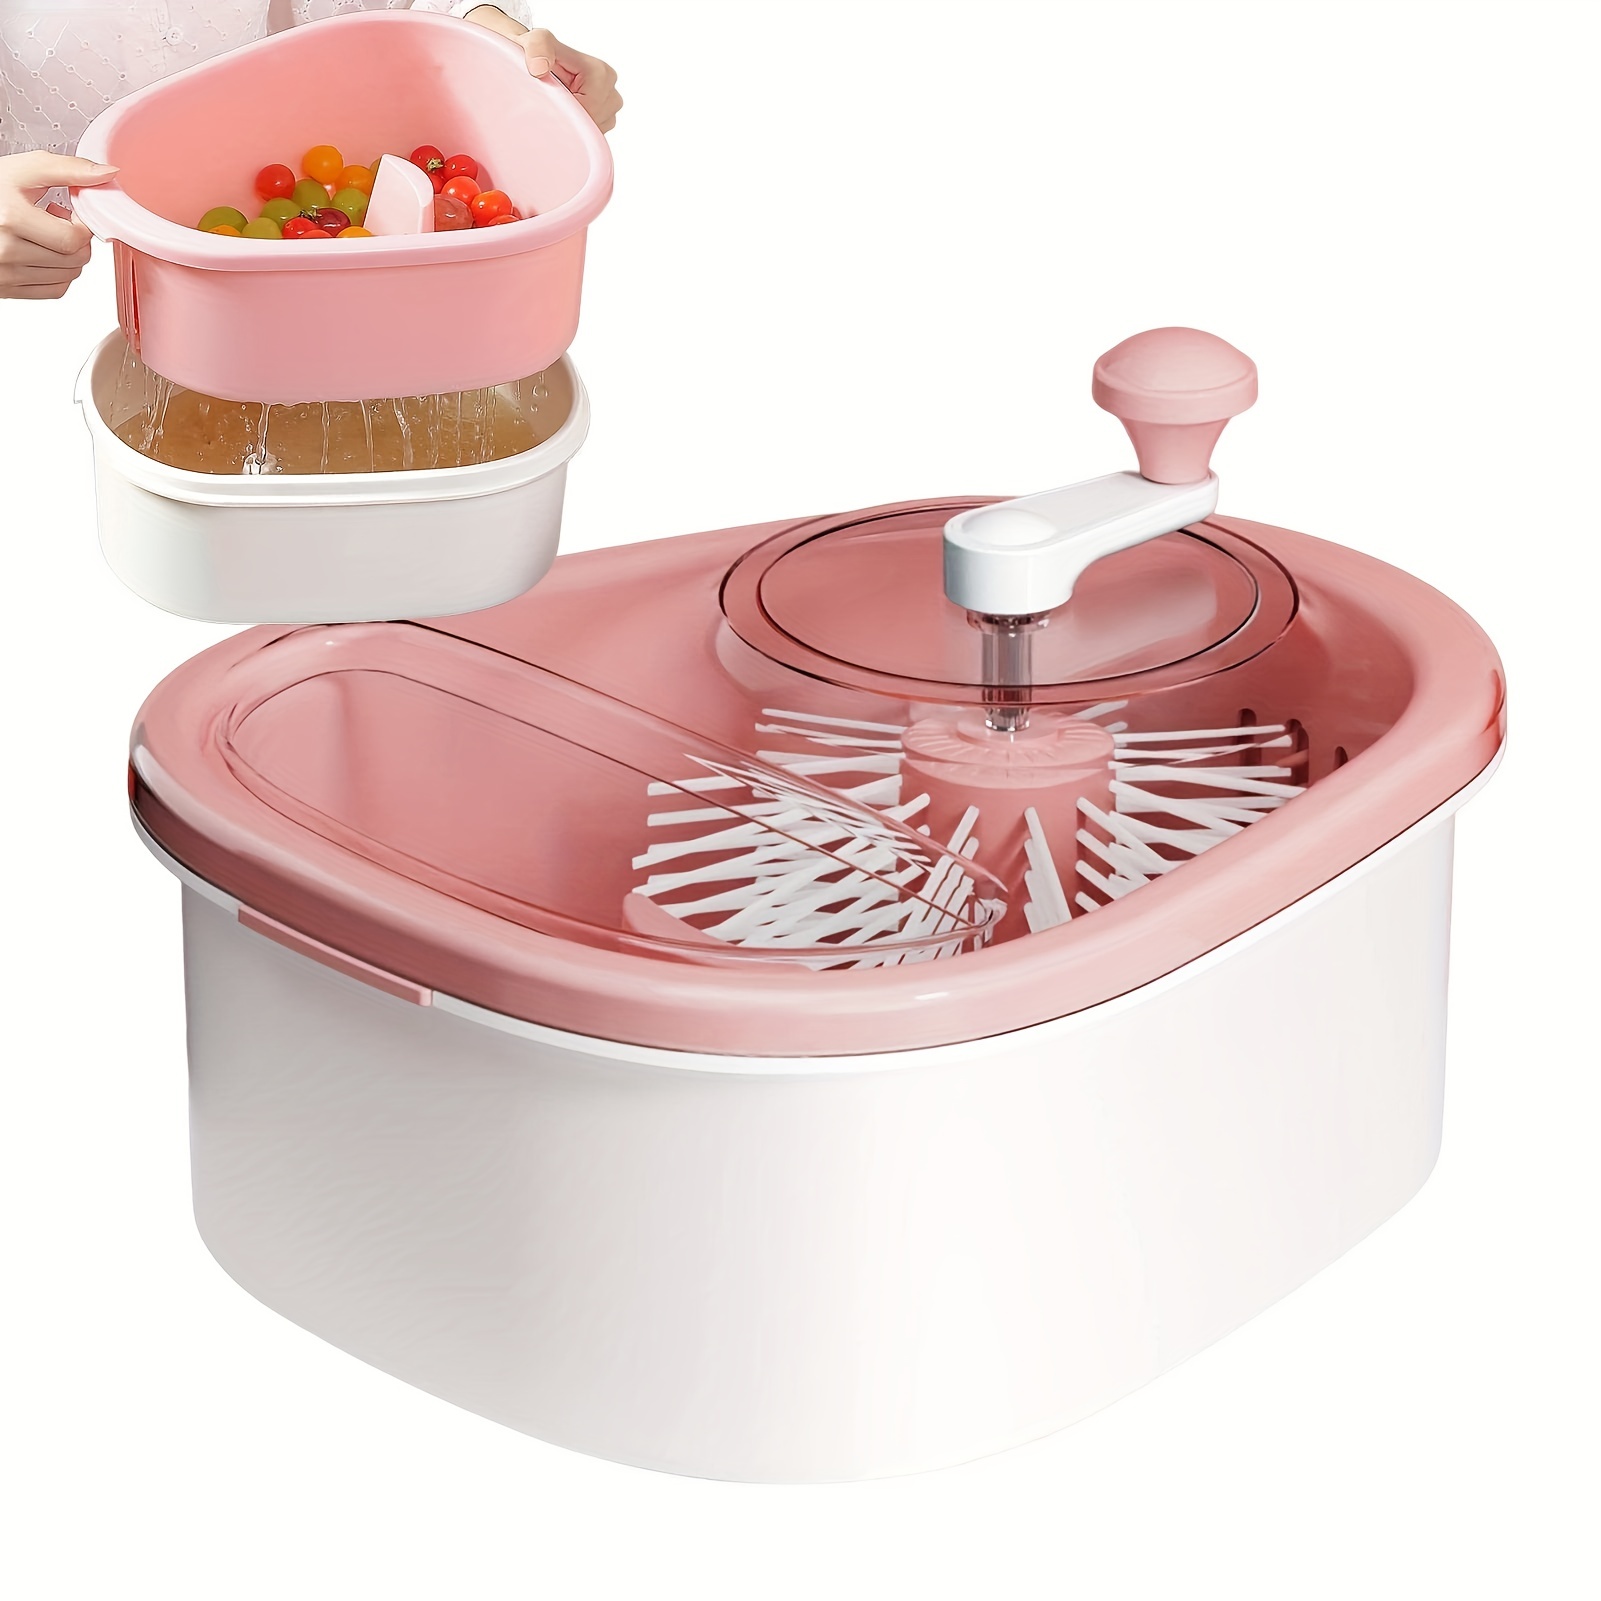 Fruit Cleaner Device in Water,Large Fruits Washing Spinner with Bowl, Lid,  Colander, Crank and Self-draining System, Fruit and Vegetable Cleaning with